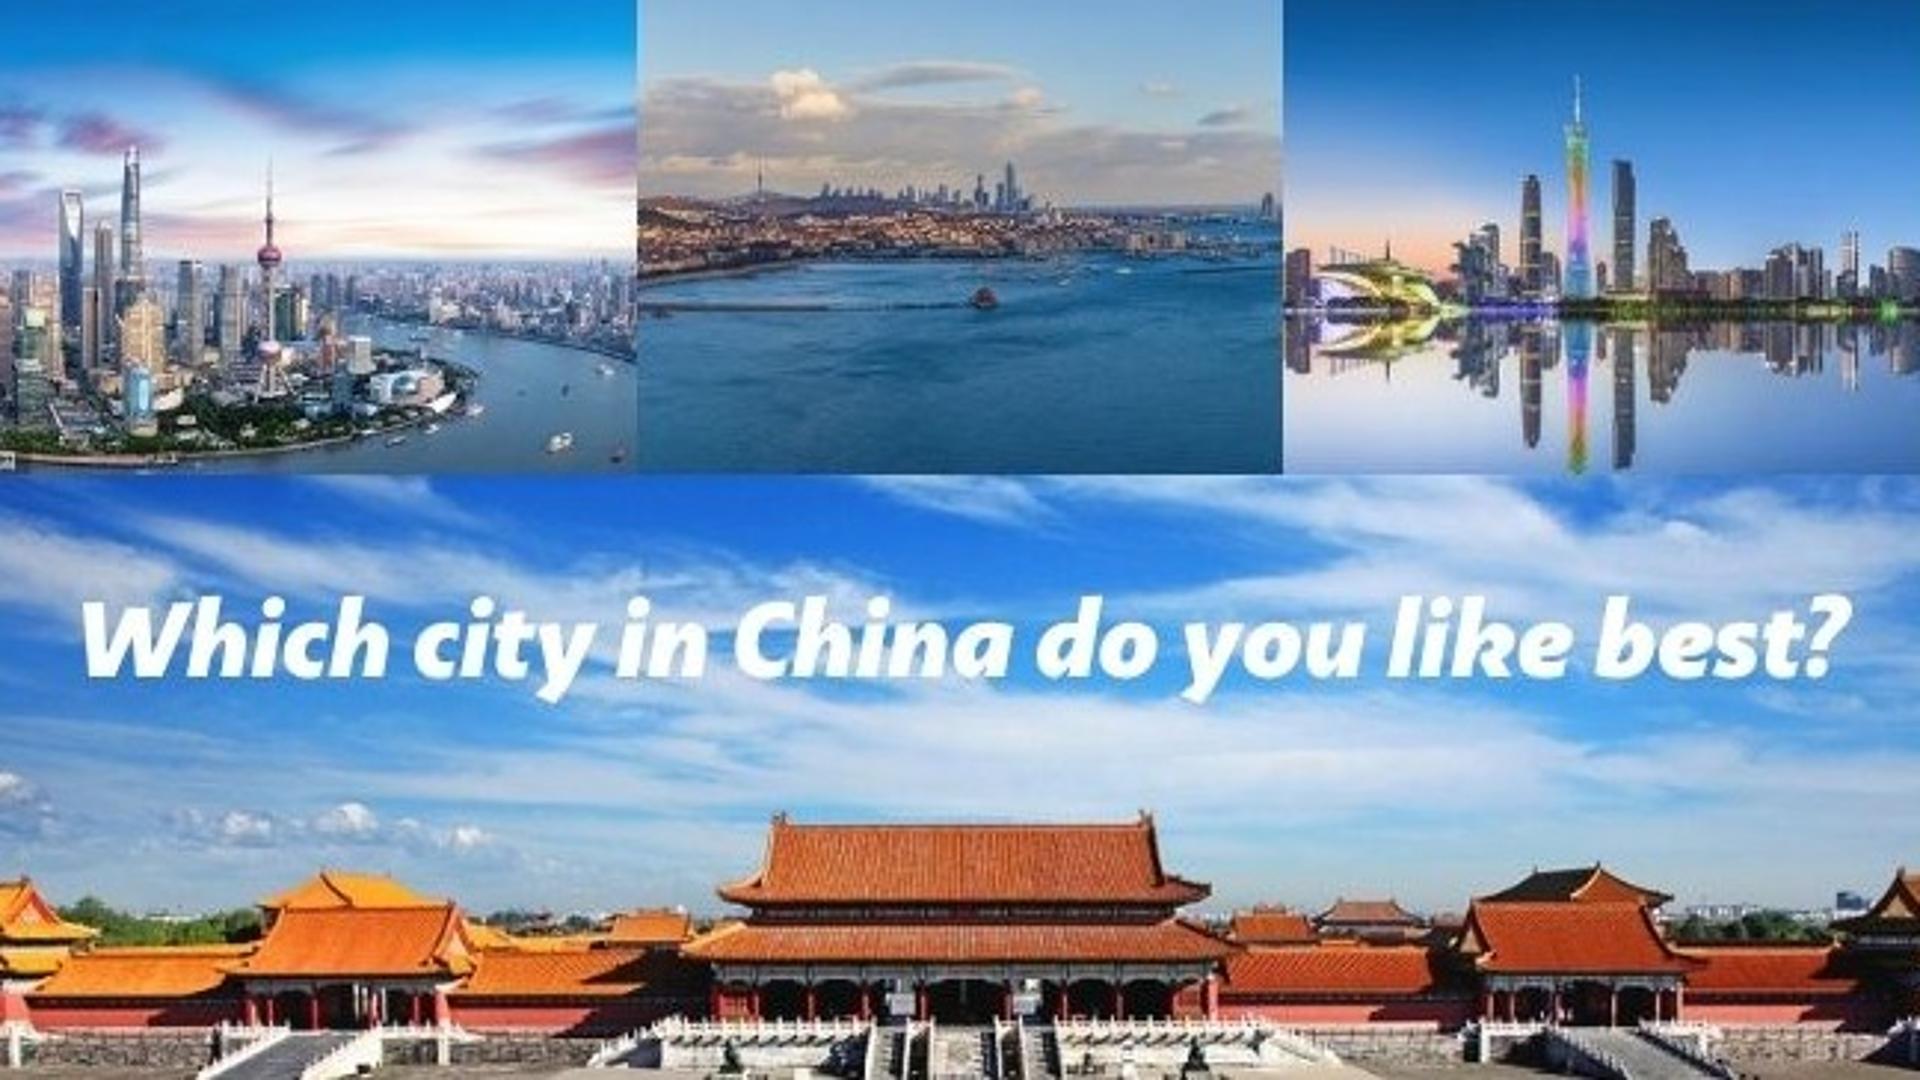 Which city in China do you like best?